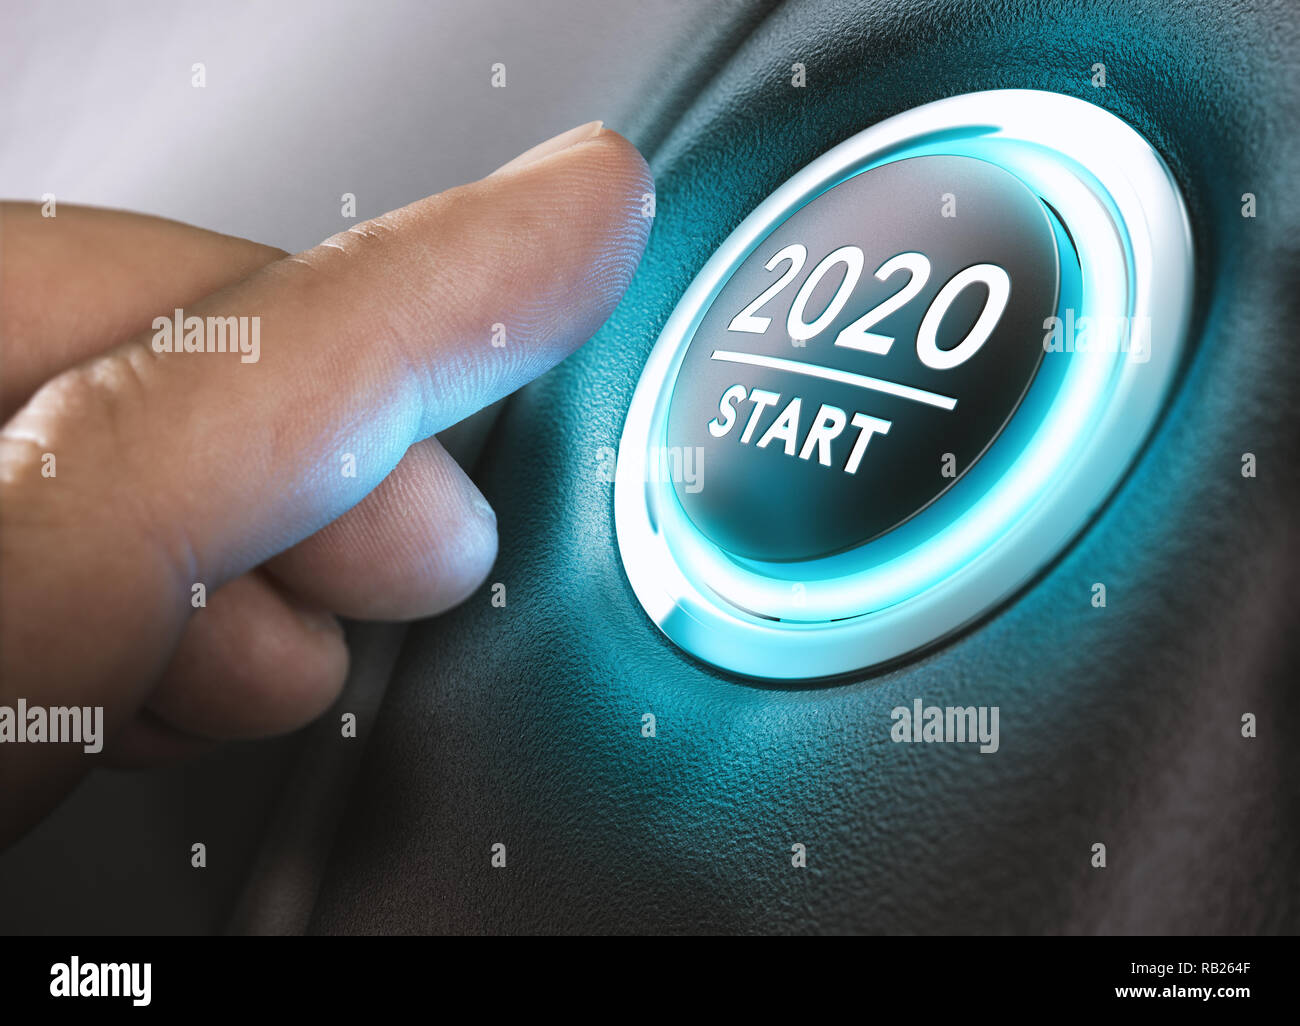 Finger about to press a car ignition button with the text 2020 start. Year two thousand and twenty concept. Stock Photo